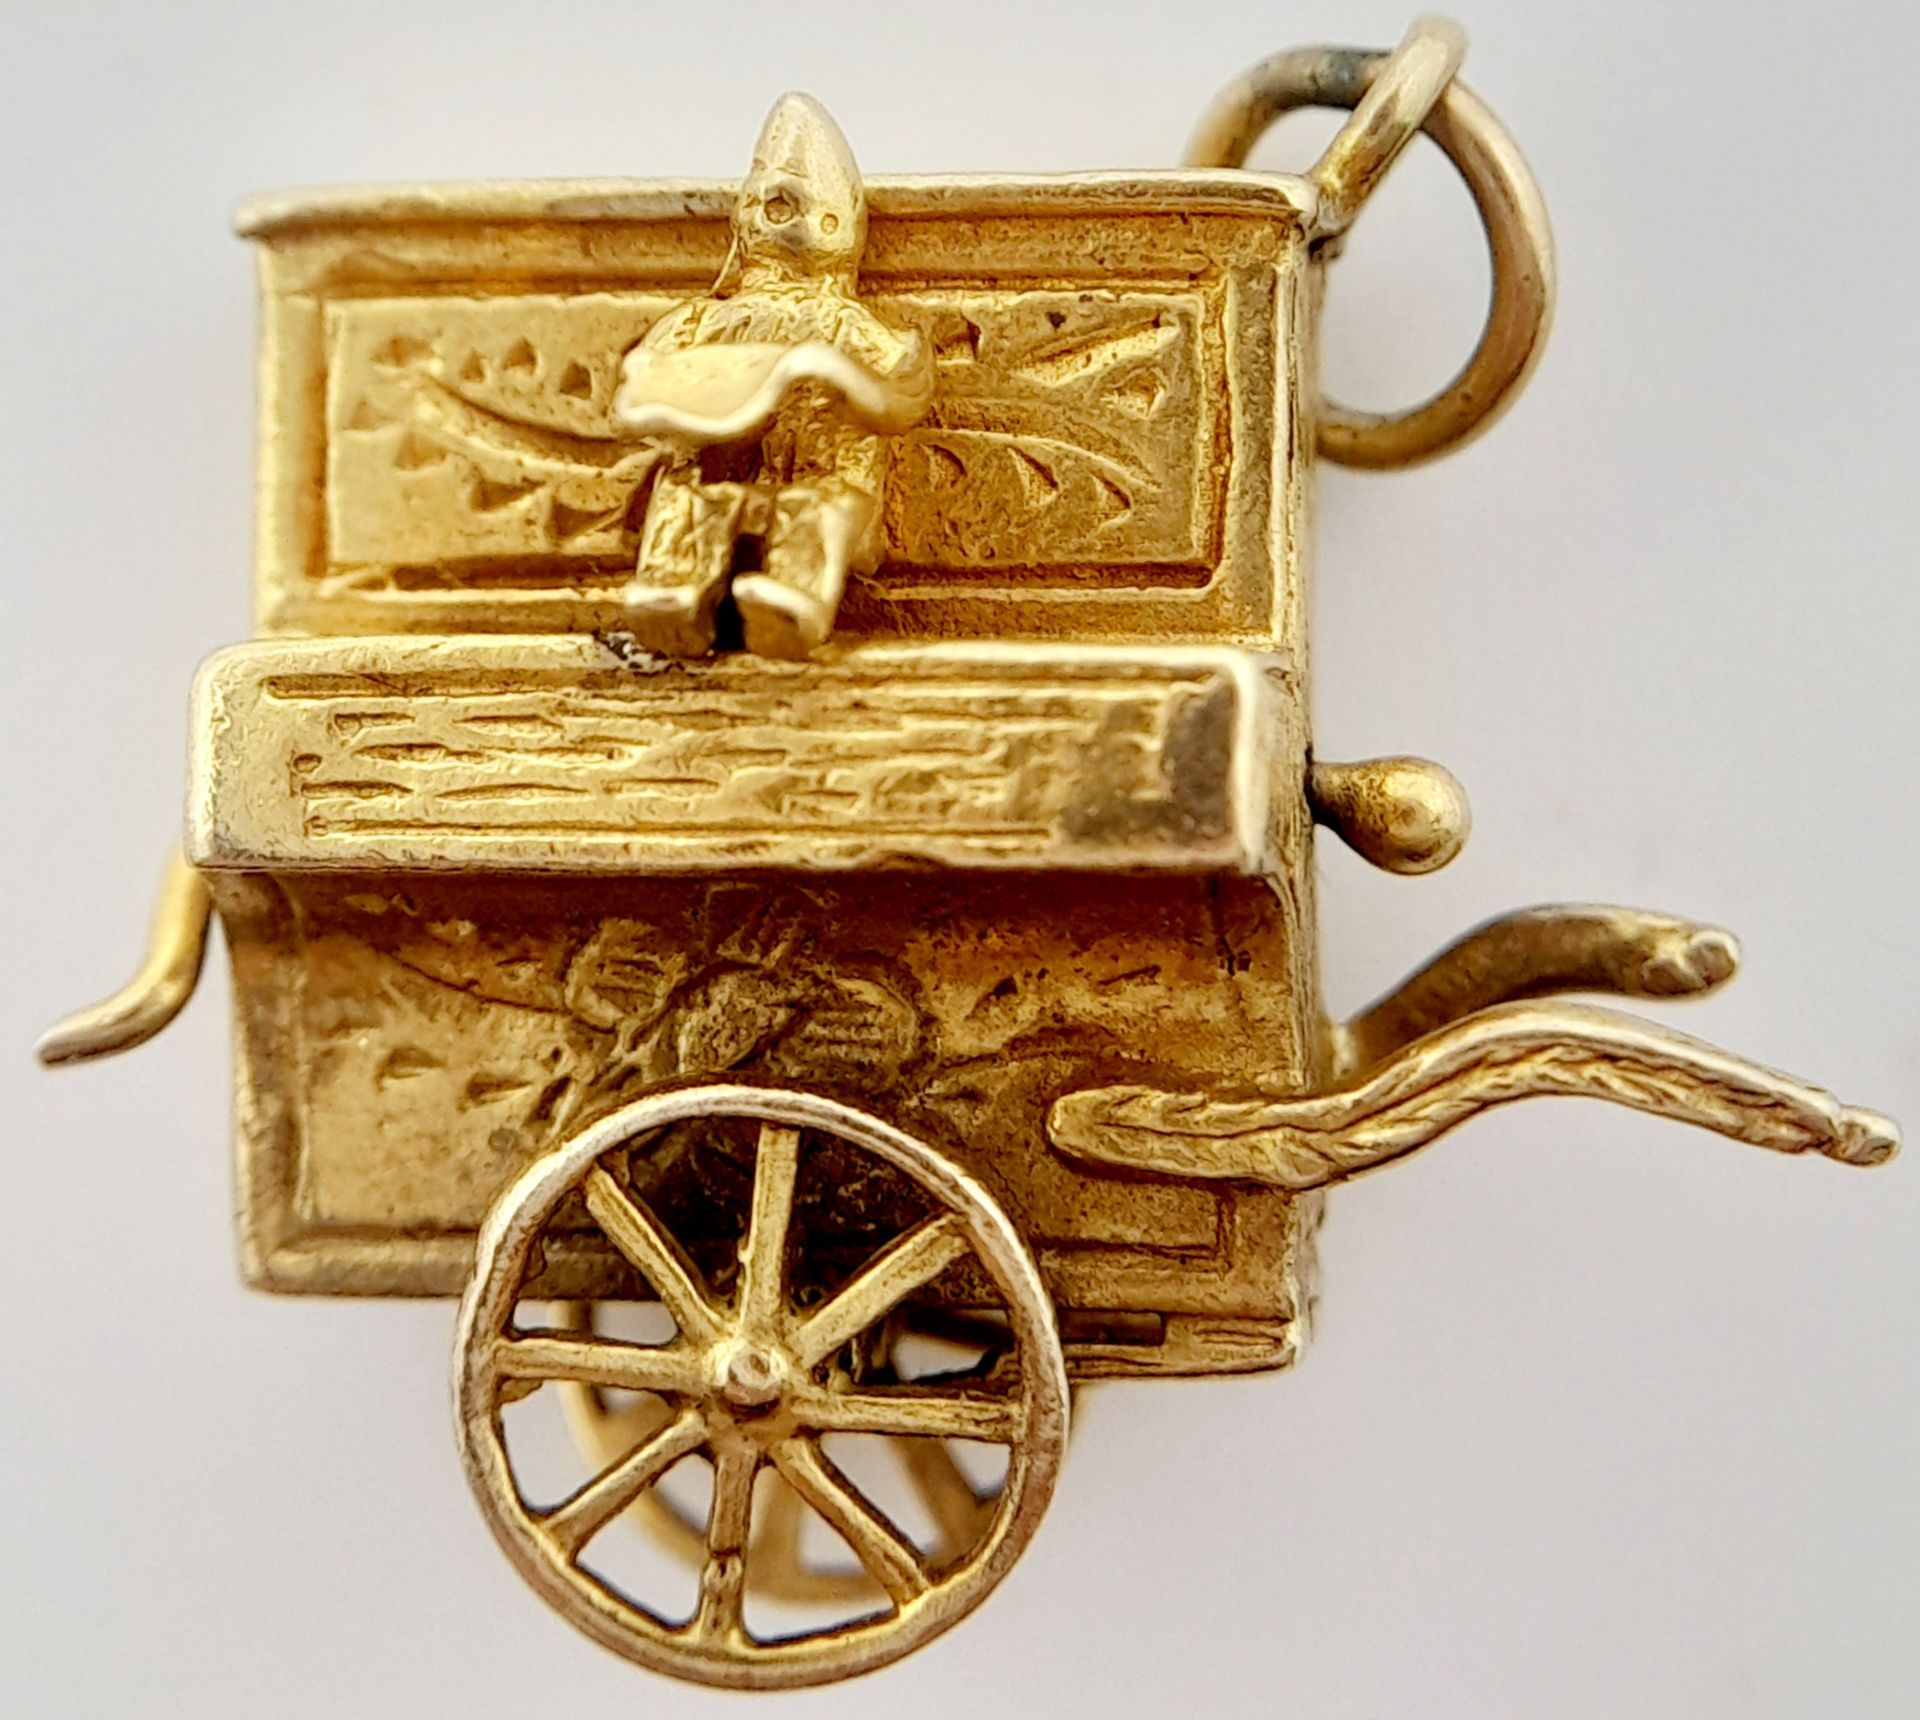 A 9K YELLOW GOLD ORGAN GRINDER AND MONKEY CHARM WITH MOVING PARTS. 2.2cm x 2.5cm, 5.2g weight.